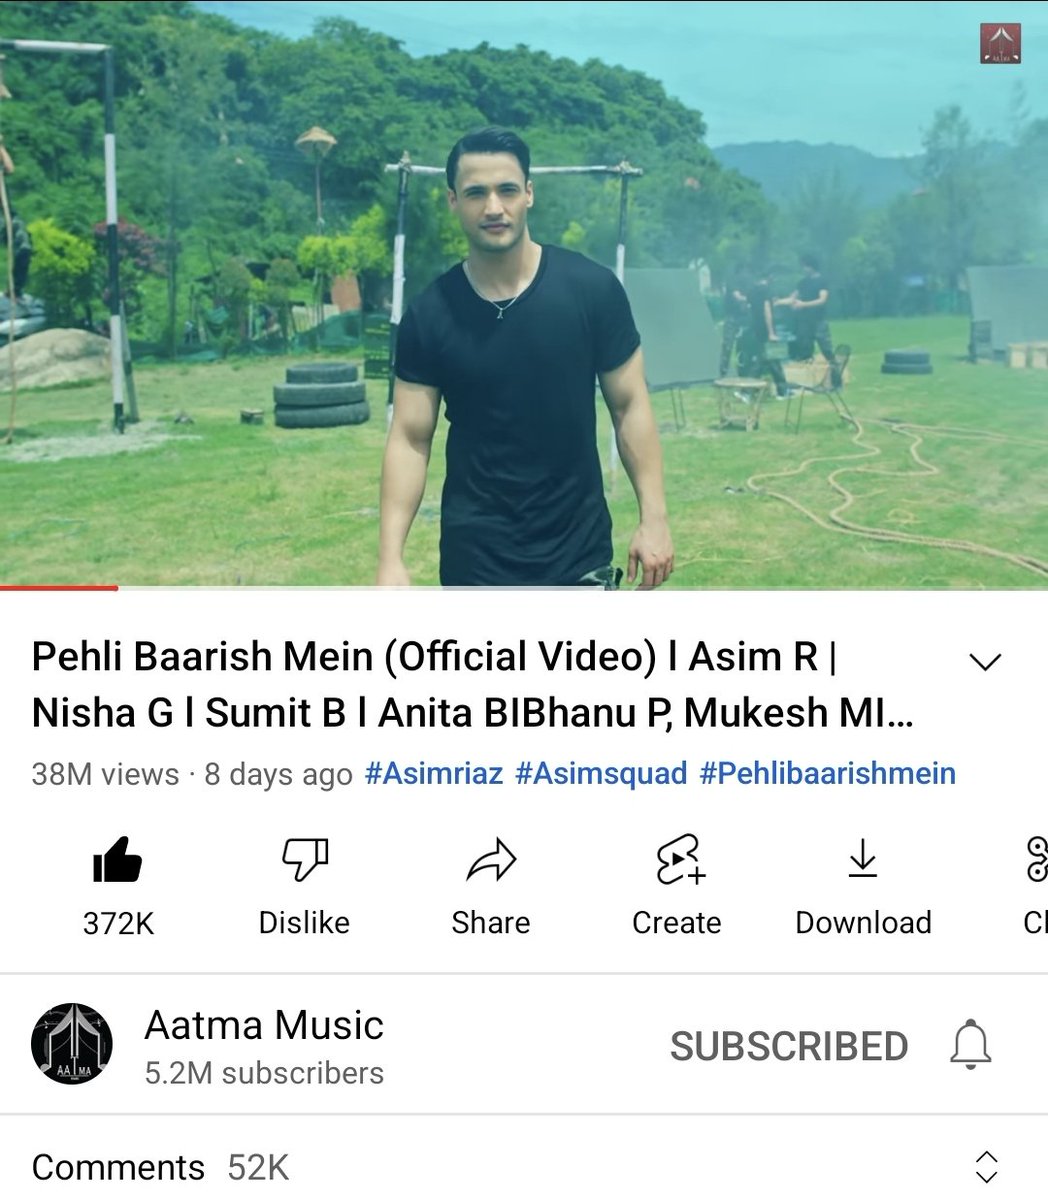 Congratulations to entire Team to #PehliBaarishMein to achieve 38M views along with 372K likes & 52K comments in just 8 days. It's Massive success by @imrealasim & @vaseemqureshii @Aatmamusic1 with their back to back projects. 
#Asimsquad  #AsimRiaz
youtu.be/RfXLTYQSU0s